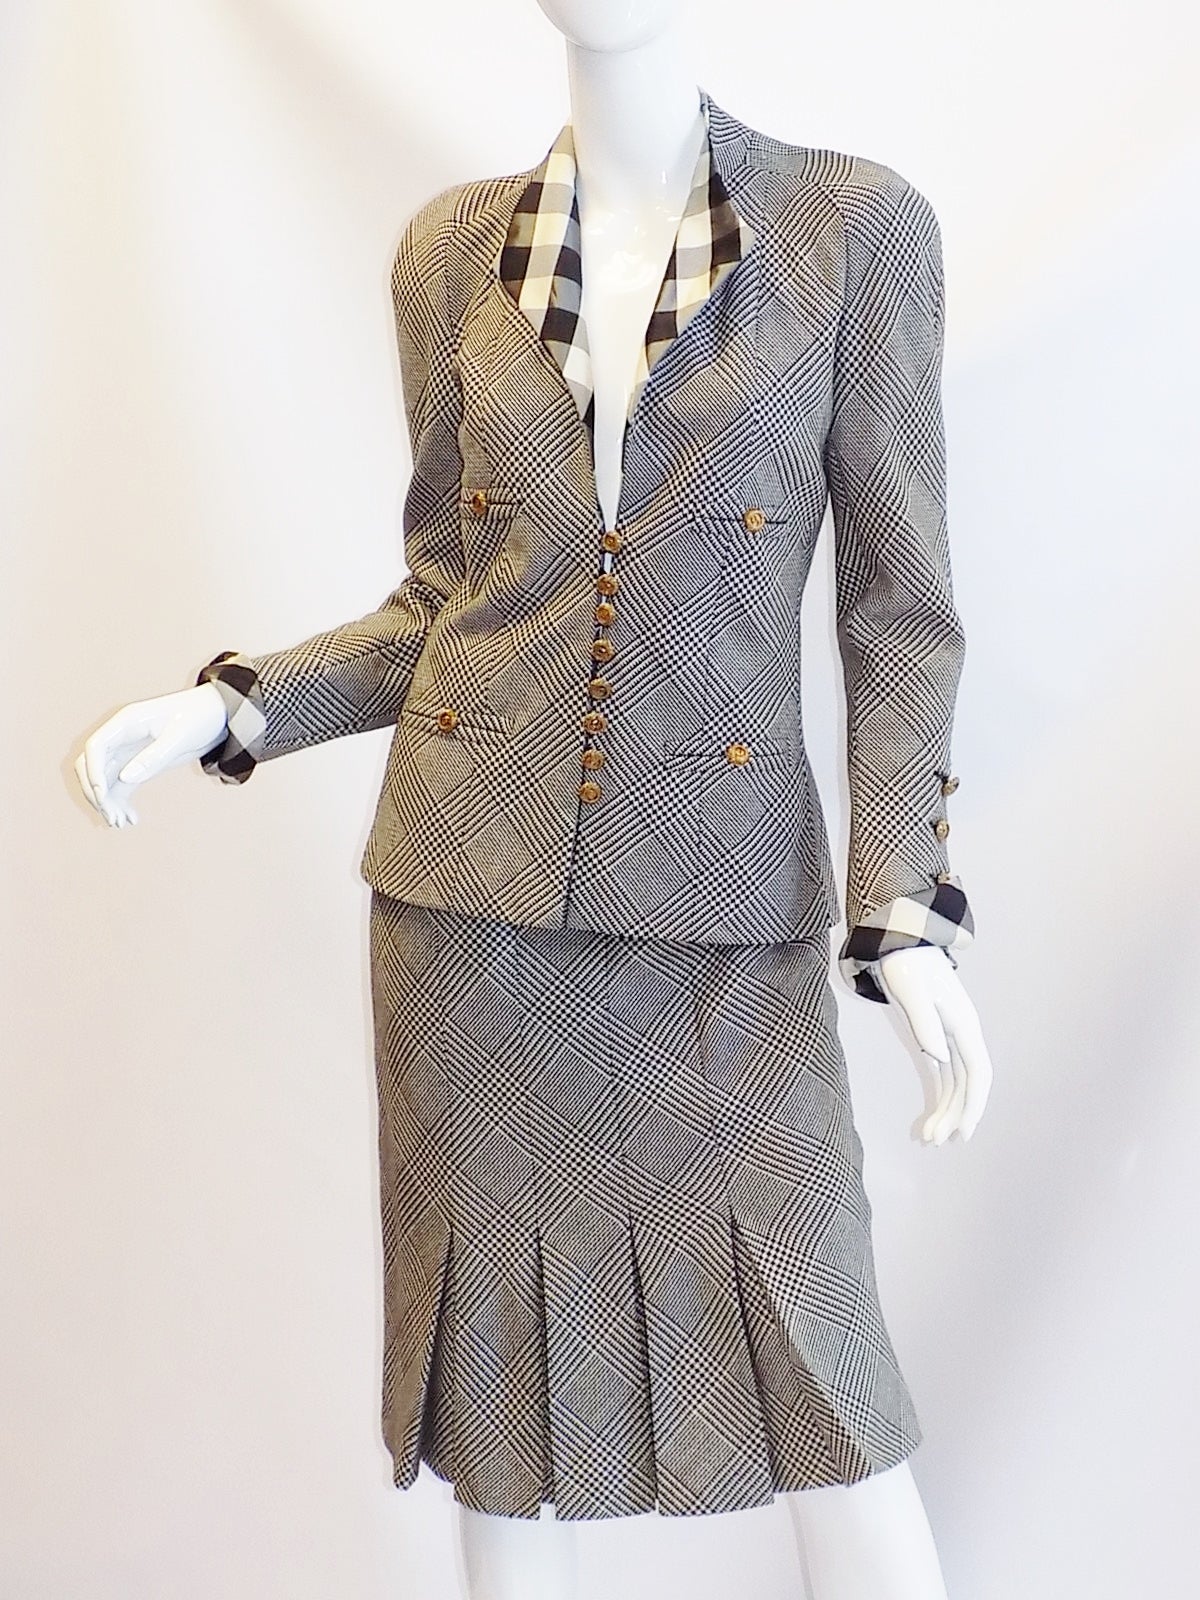 Lite wool  hounds-tooth gabardine in black and white plaid . Silk taffeta check detail accents . Spectacular gold tone metal  cc logo  buttons . Skirt is kick pleat back and front. Side zipper.. ID number # 63278
Silk lined with gold metal